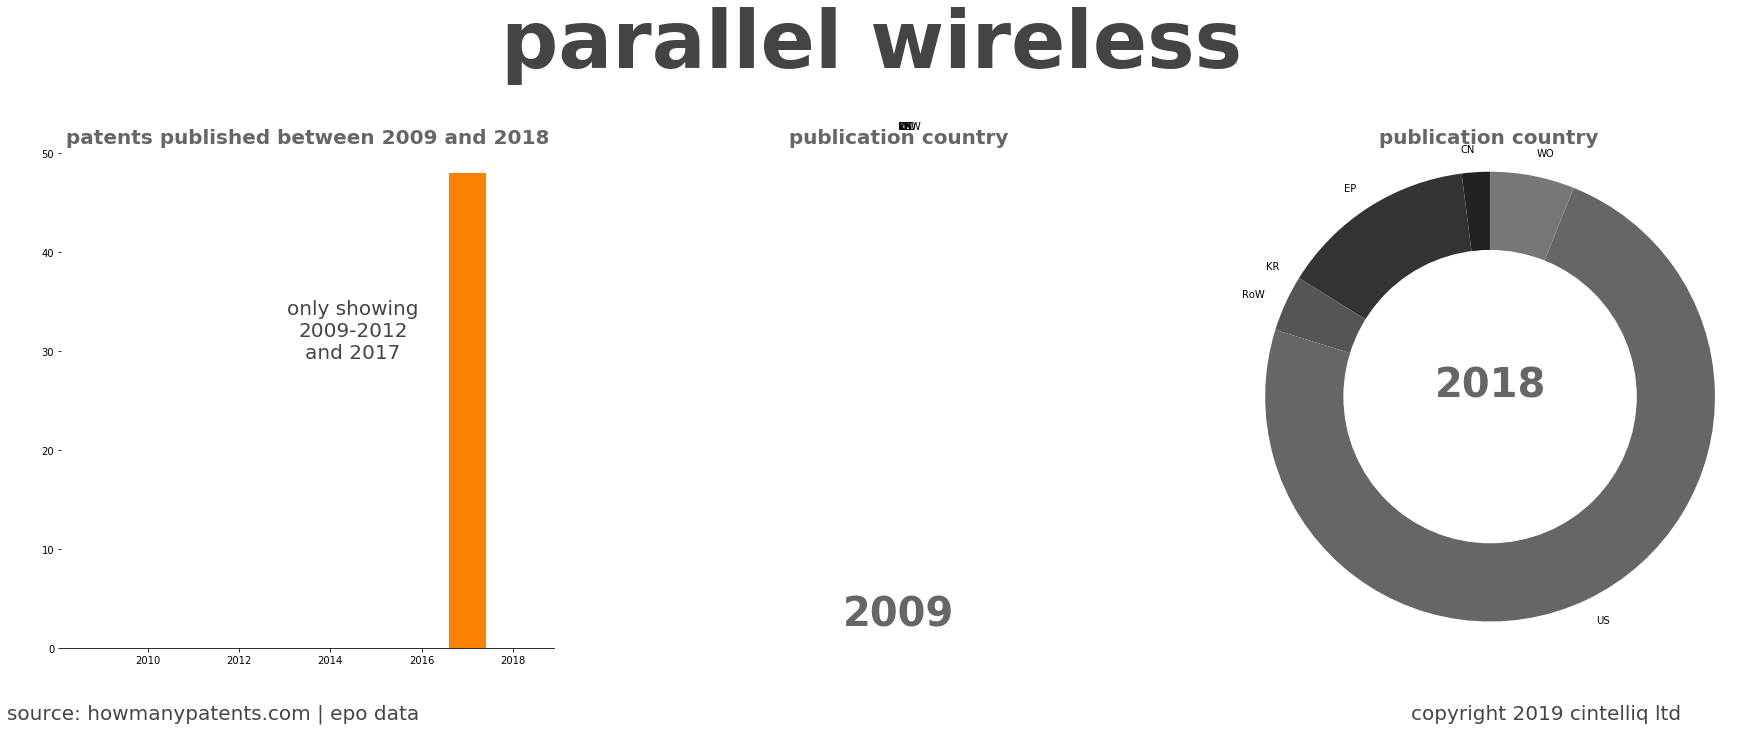 summary of patents for Parallel Wireless